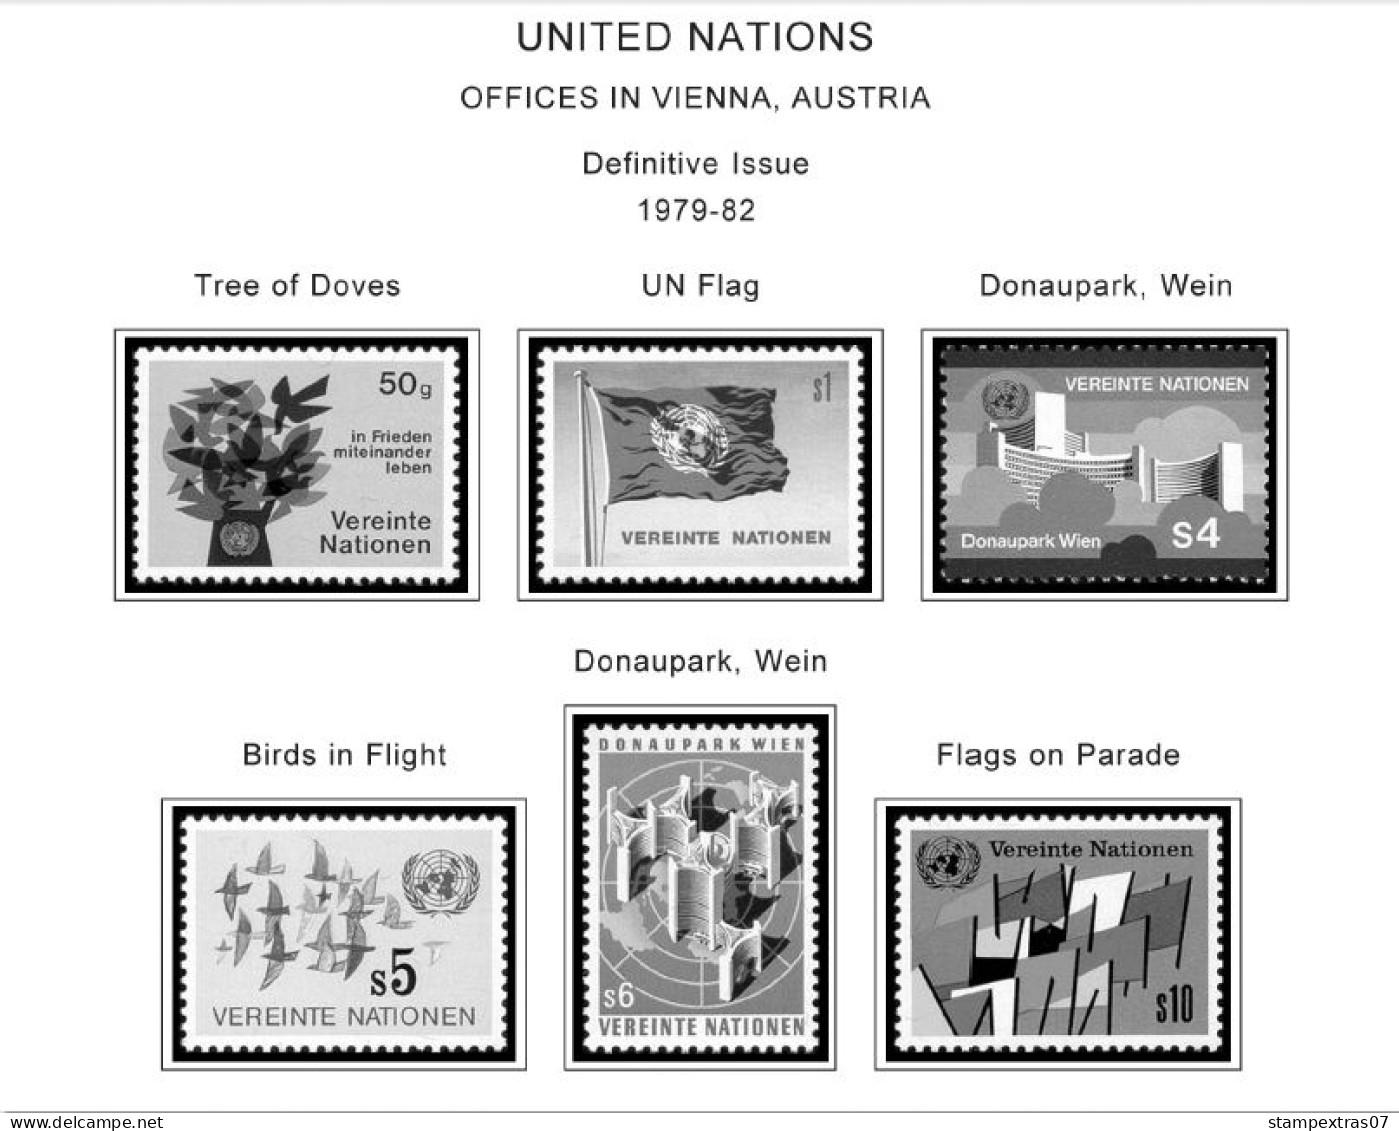 UNITED NATIONS - VIENNA 1979-2020 STAMP ALBUM PAGES (165 B&w Illustrated Pages) - Englisch